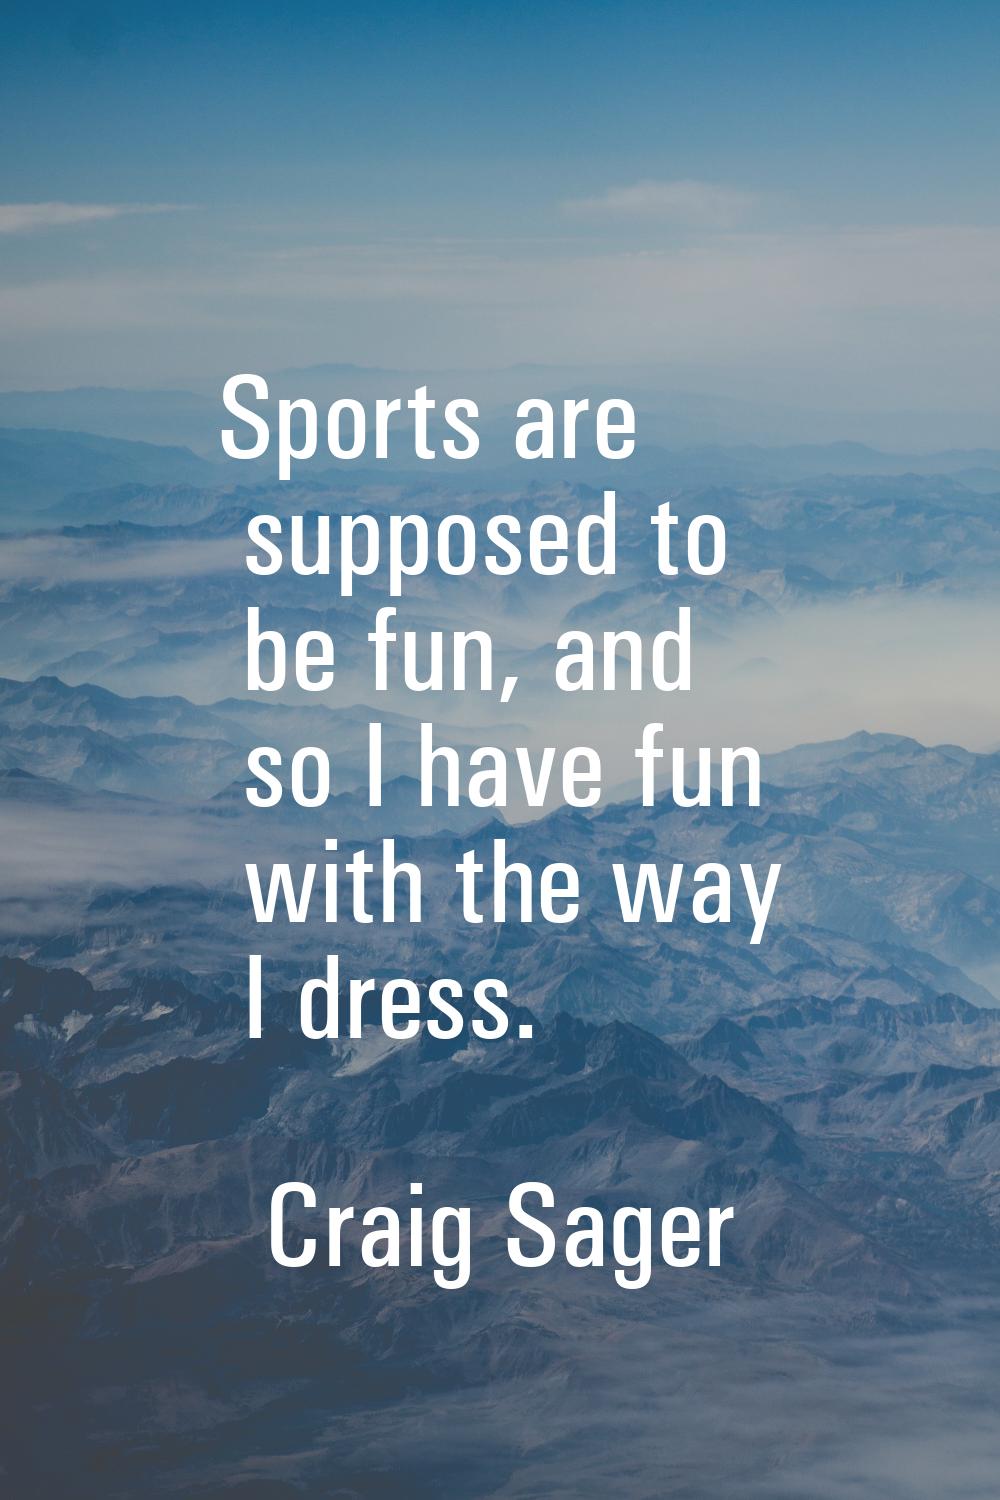 Sports are supposed to be fun, and so I have fun with the way I dress.